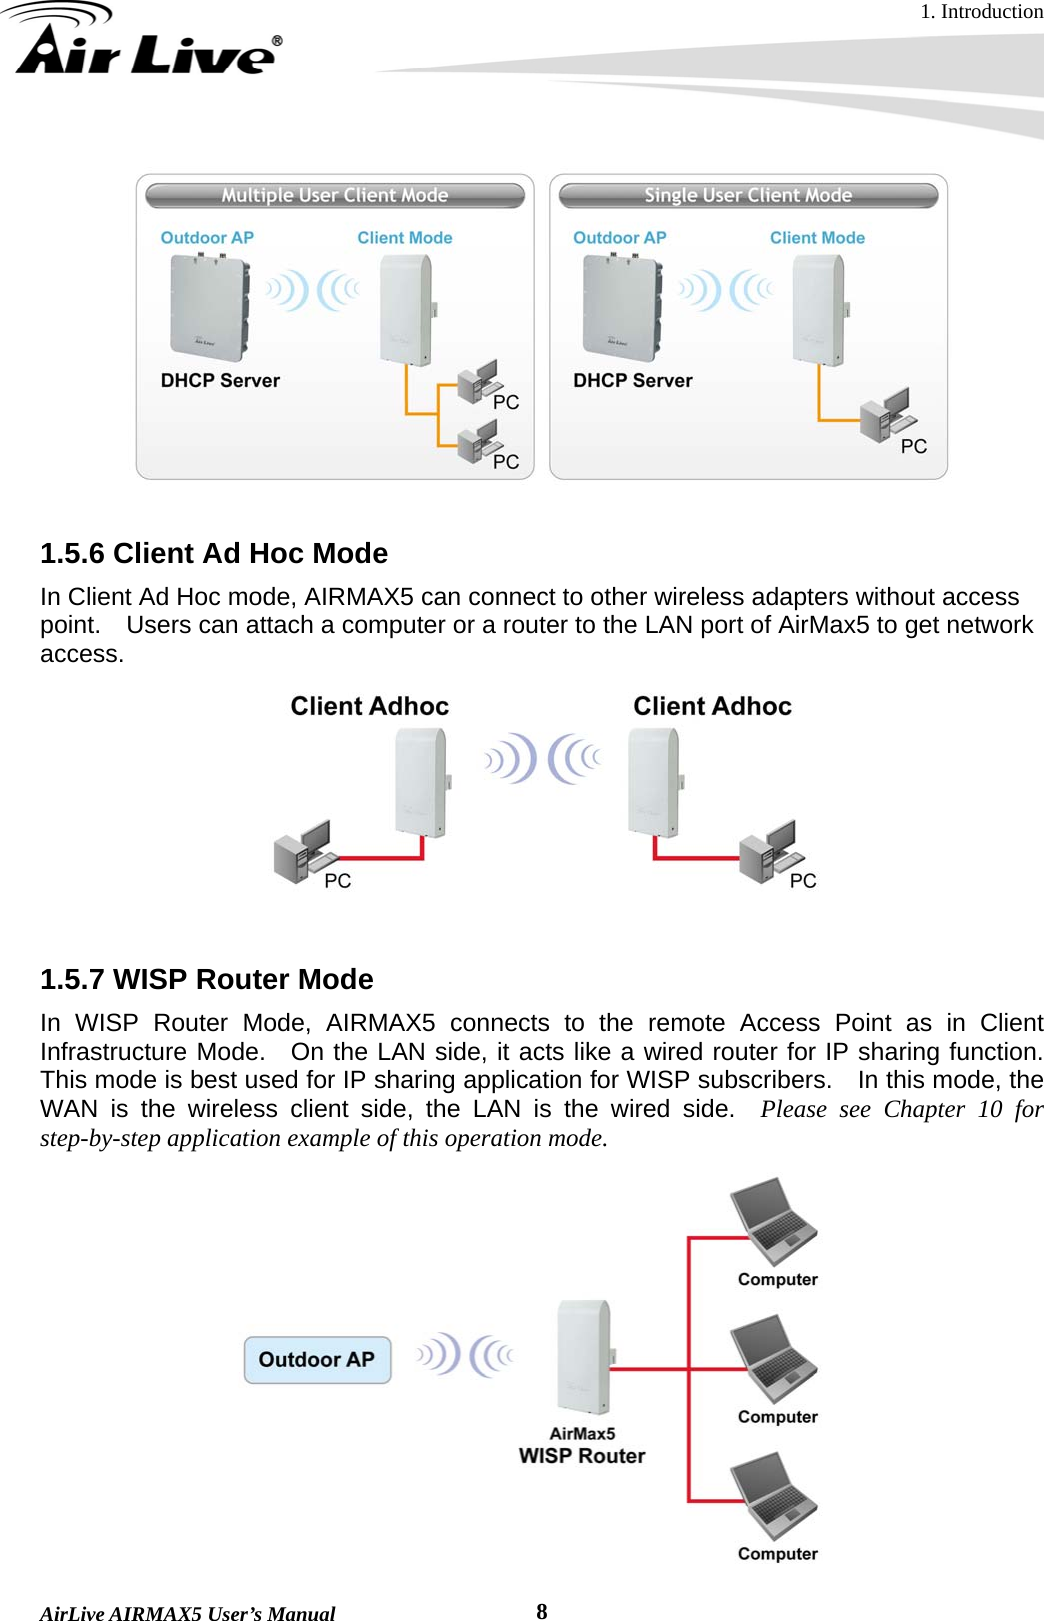 1. Introduction  AirLive AIRMAX5 User’s Manual  8  1.5.6 Client Ad Hoc Mode In Client Ad Hoc mode, AIRMAX5 can connect to other wireless adapters without access point.    Users can attach a computer or a router to the LAN port of AirMax5 to get network access.   1.5.7 WISP Router Mode In WISP Router Mode, AIRMAX5 connects to the remote Access Point as in Client Infrastructure Mode.  On the LAN side, it acts like a wired router for IP sharing function.  This mode is best used for IP sharing application for WISP subscribers.  In this mode, the WAN is the wireless client side, the LAN is the wired side.  Please see Chapter 10 for step-by-step application example of this operation mode.  